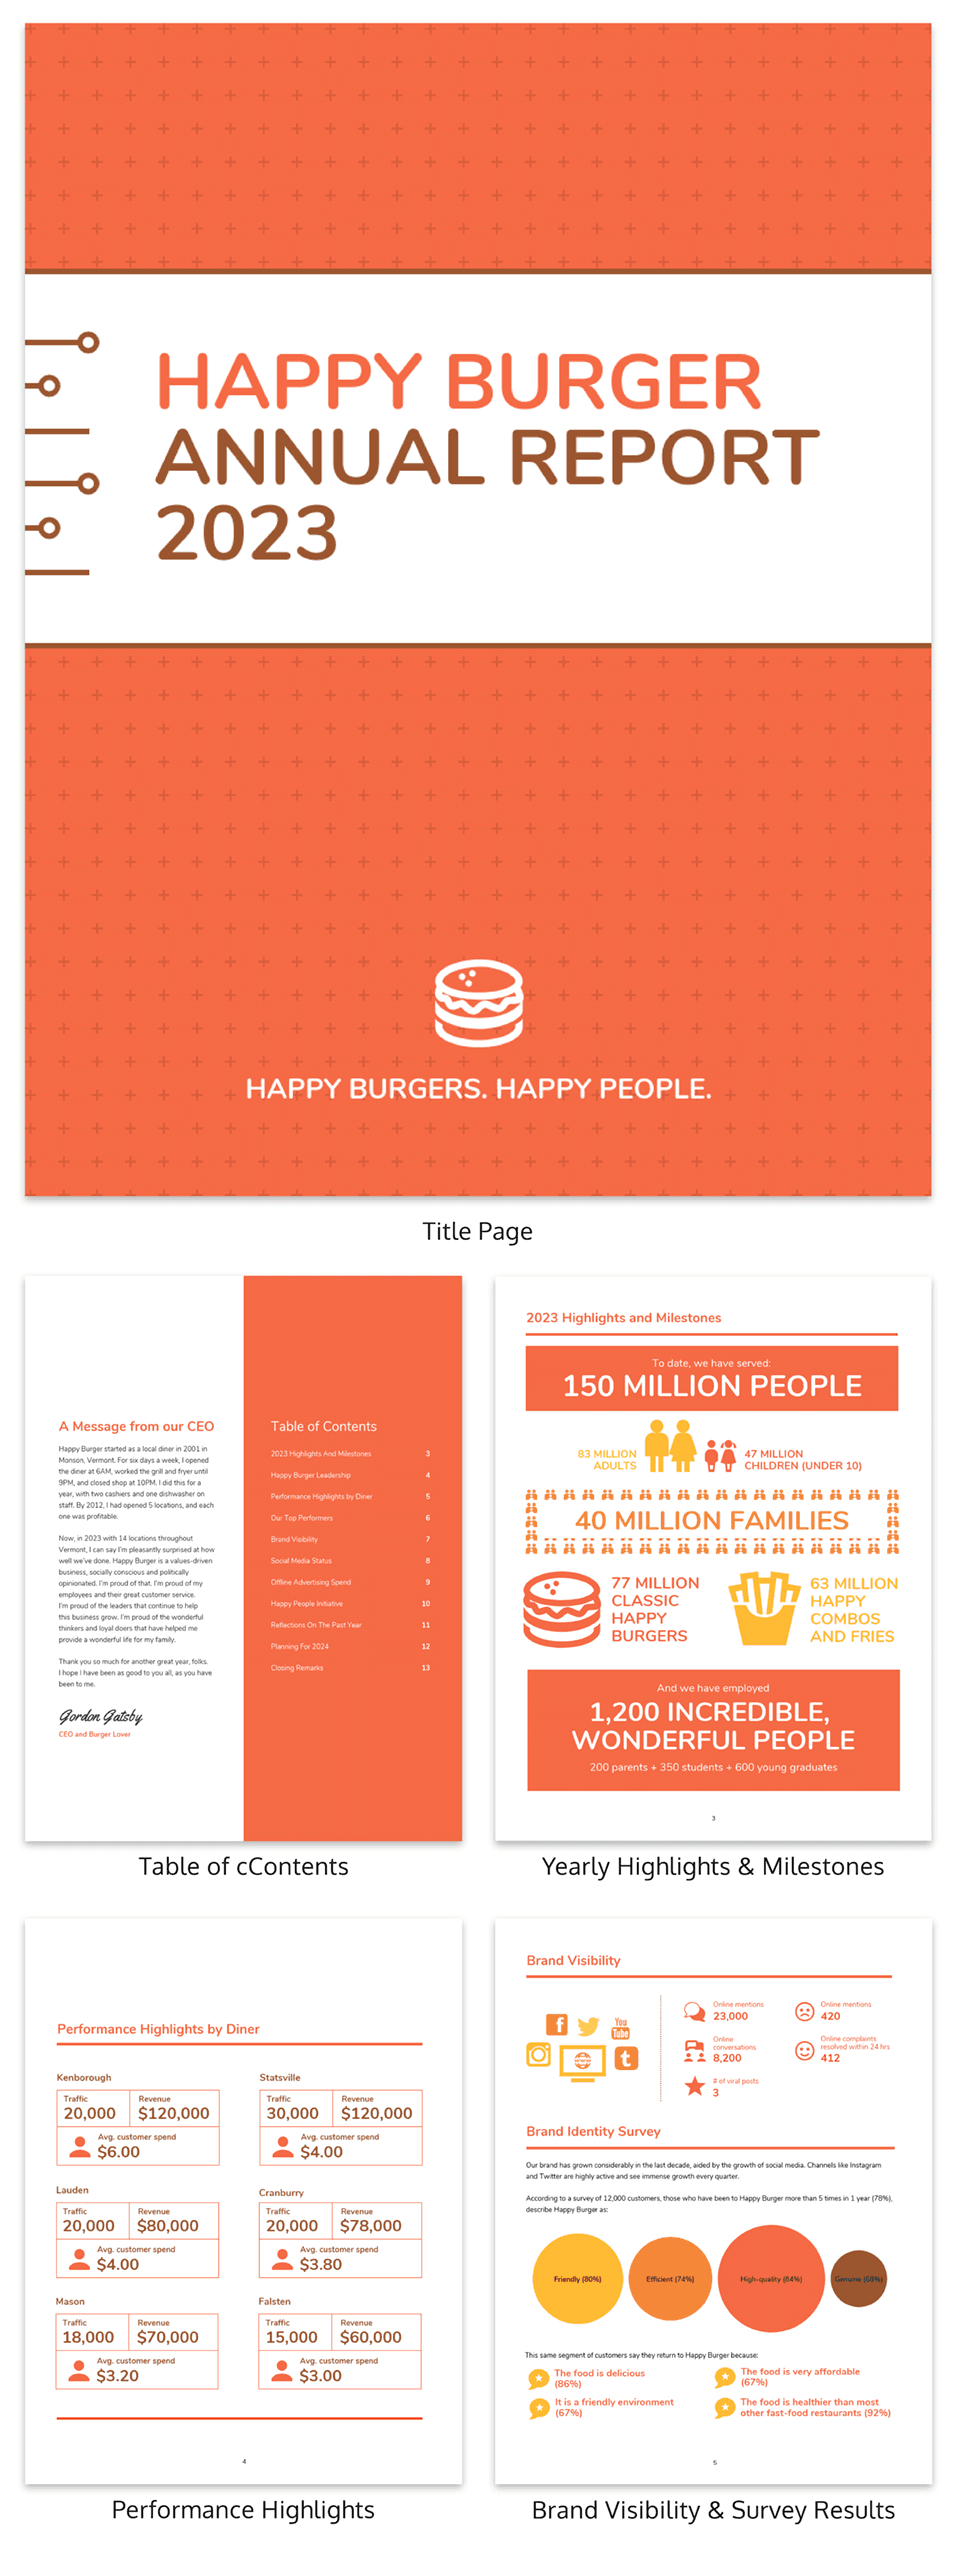 55+ Annual Report Design Templates & Inspirational Examples Within Wrap Up Report Template